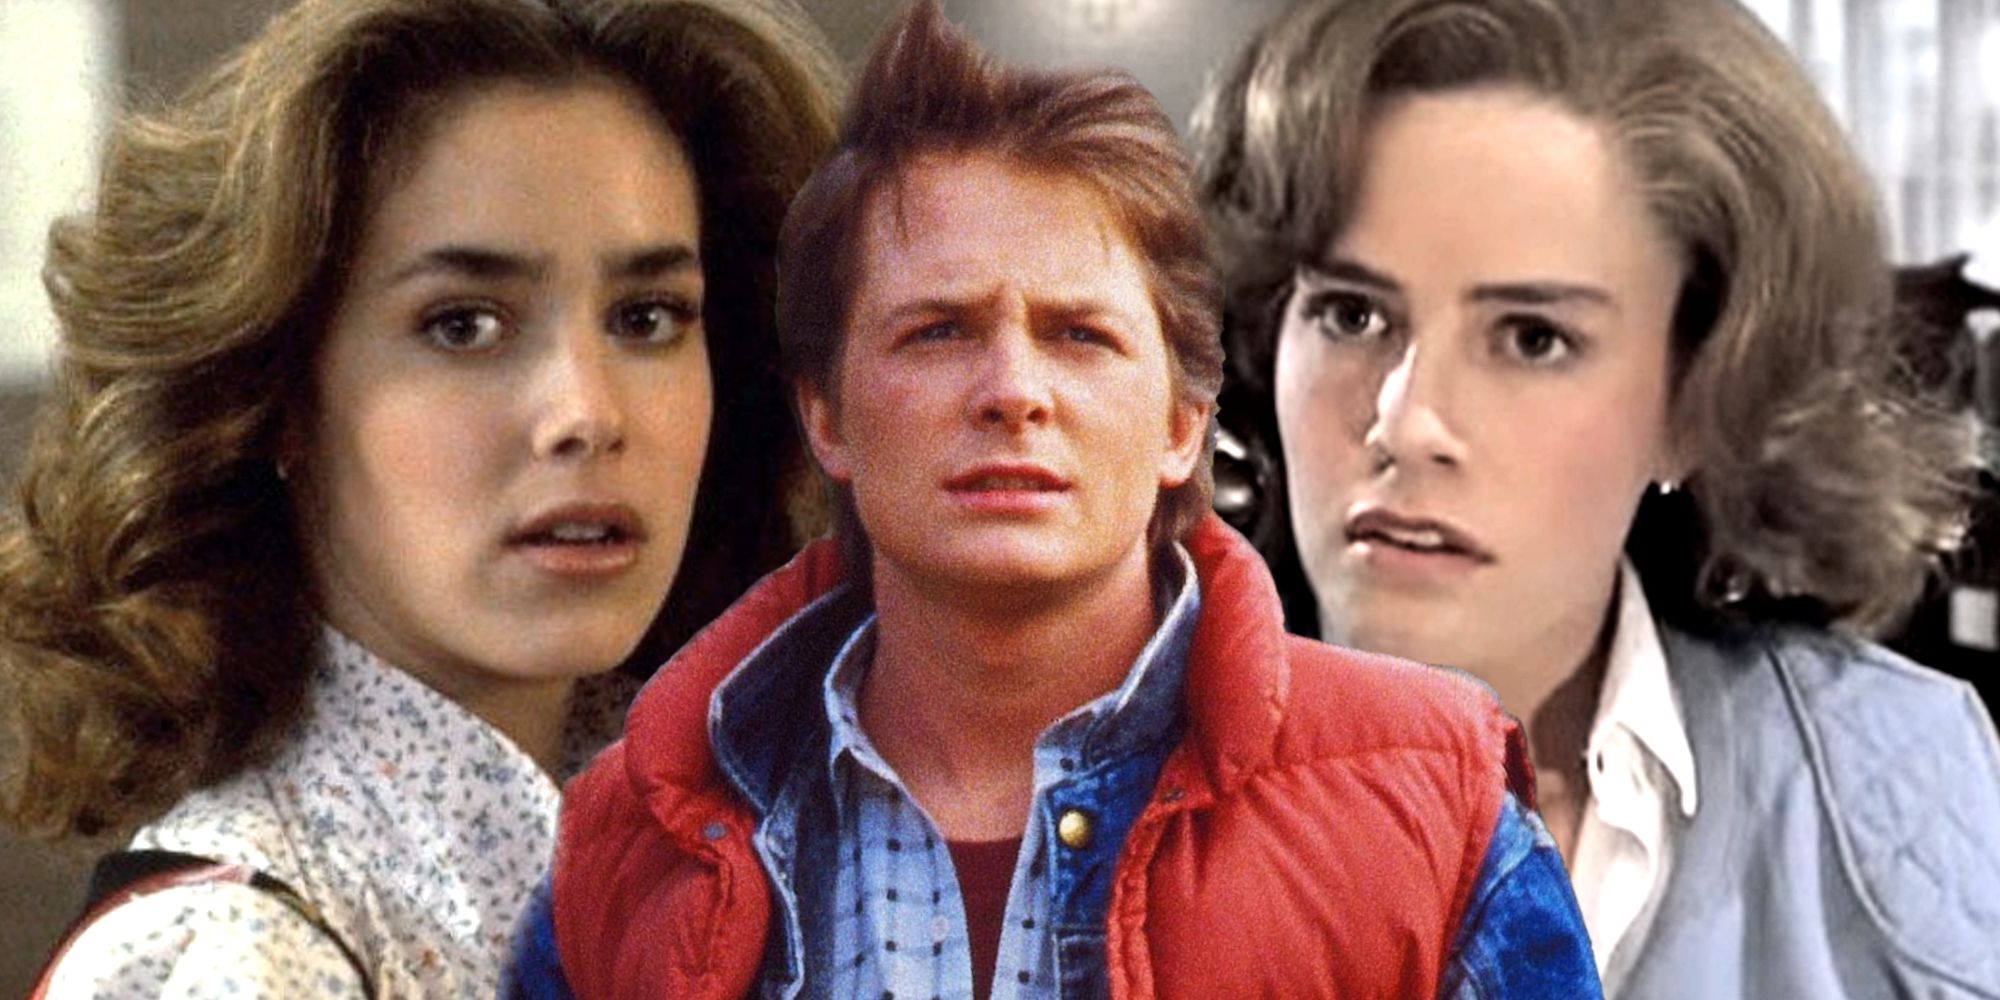 Michael J Fox as Marty McFly with Claudia Wells and Elisabeth Shue as Jennifer Parker in Back to the Future Part I and II